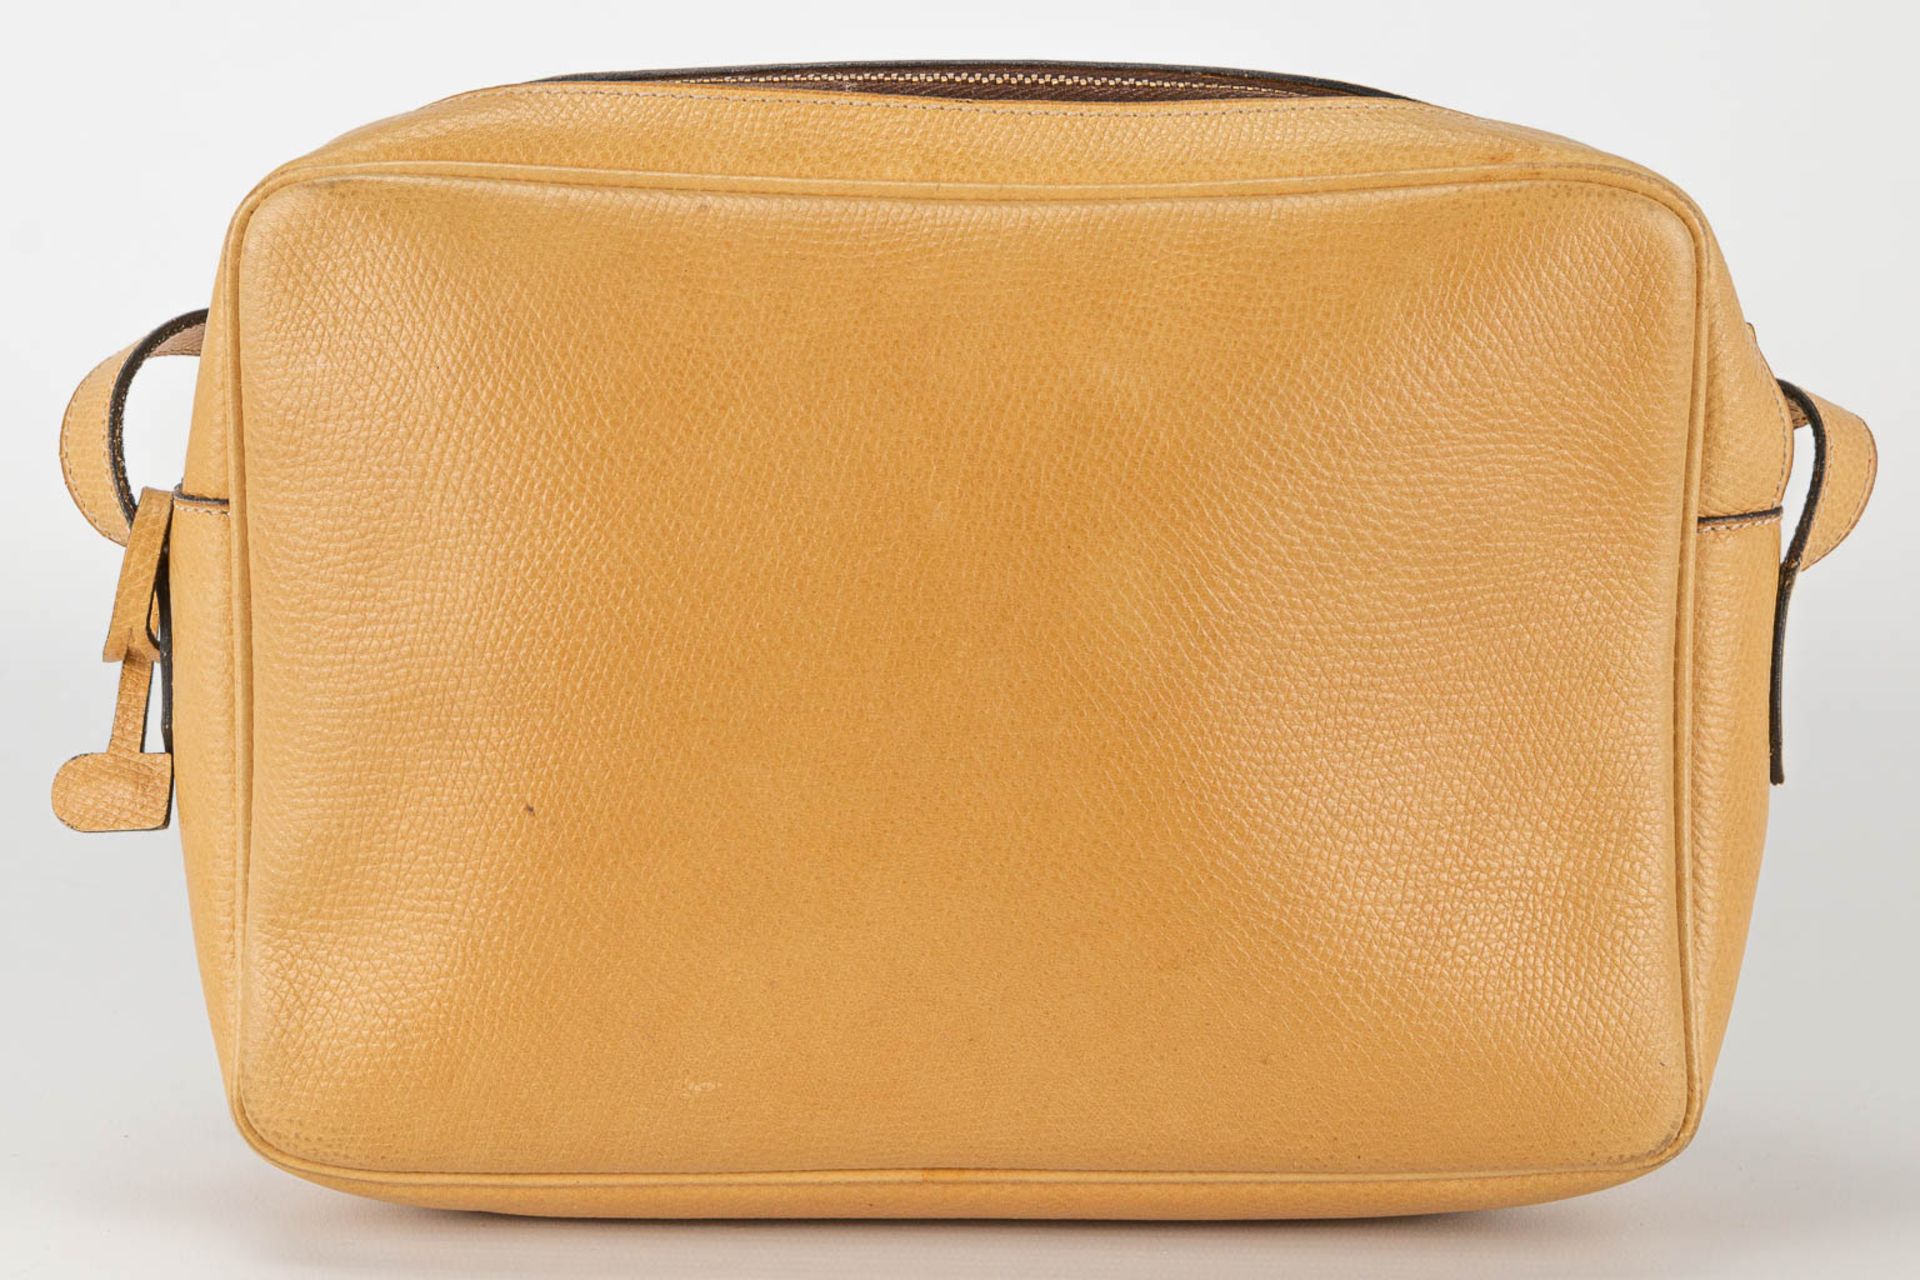 A purse made of brown leather and marked Delvaux. - Image 14 of 14